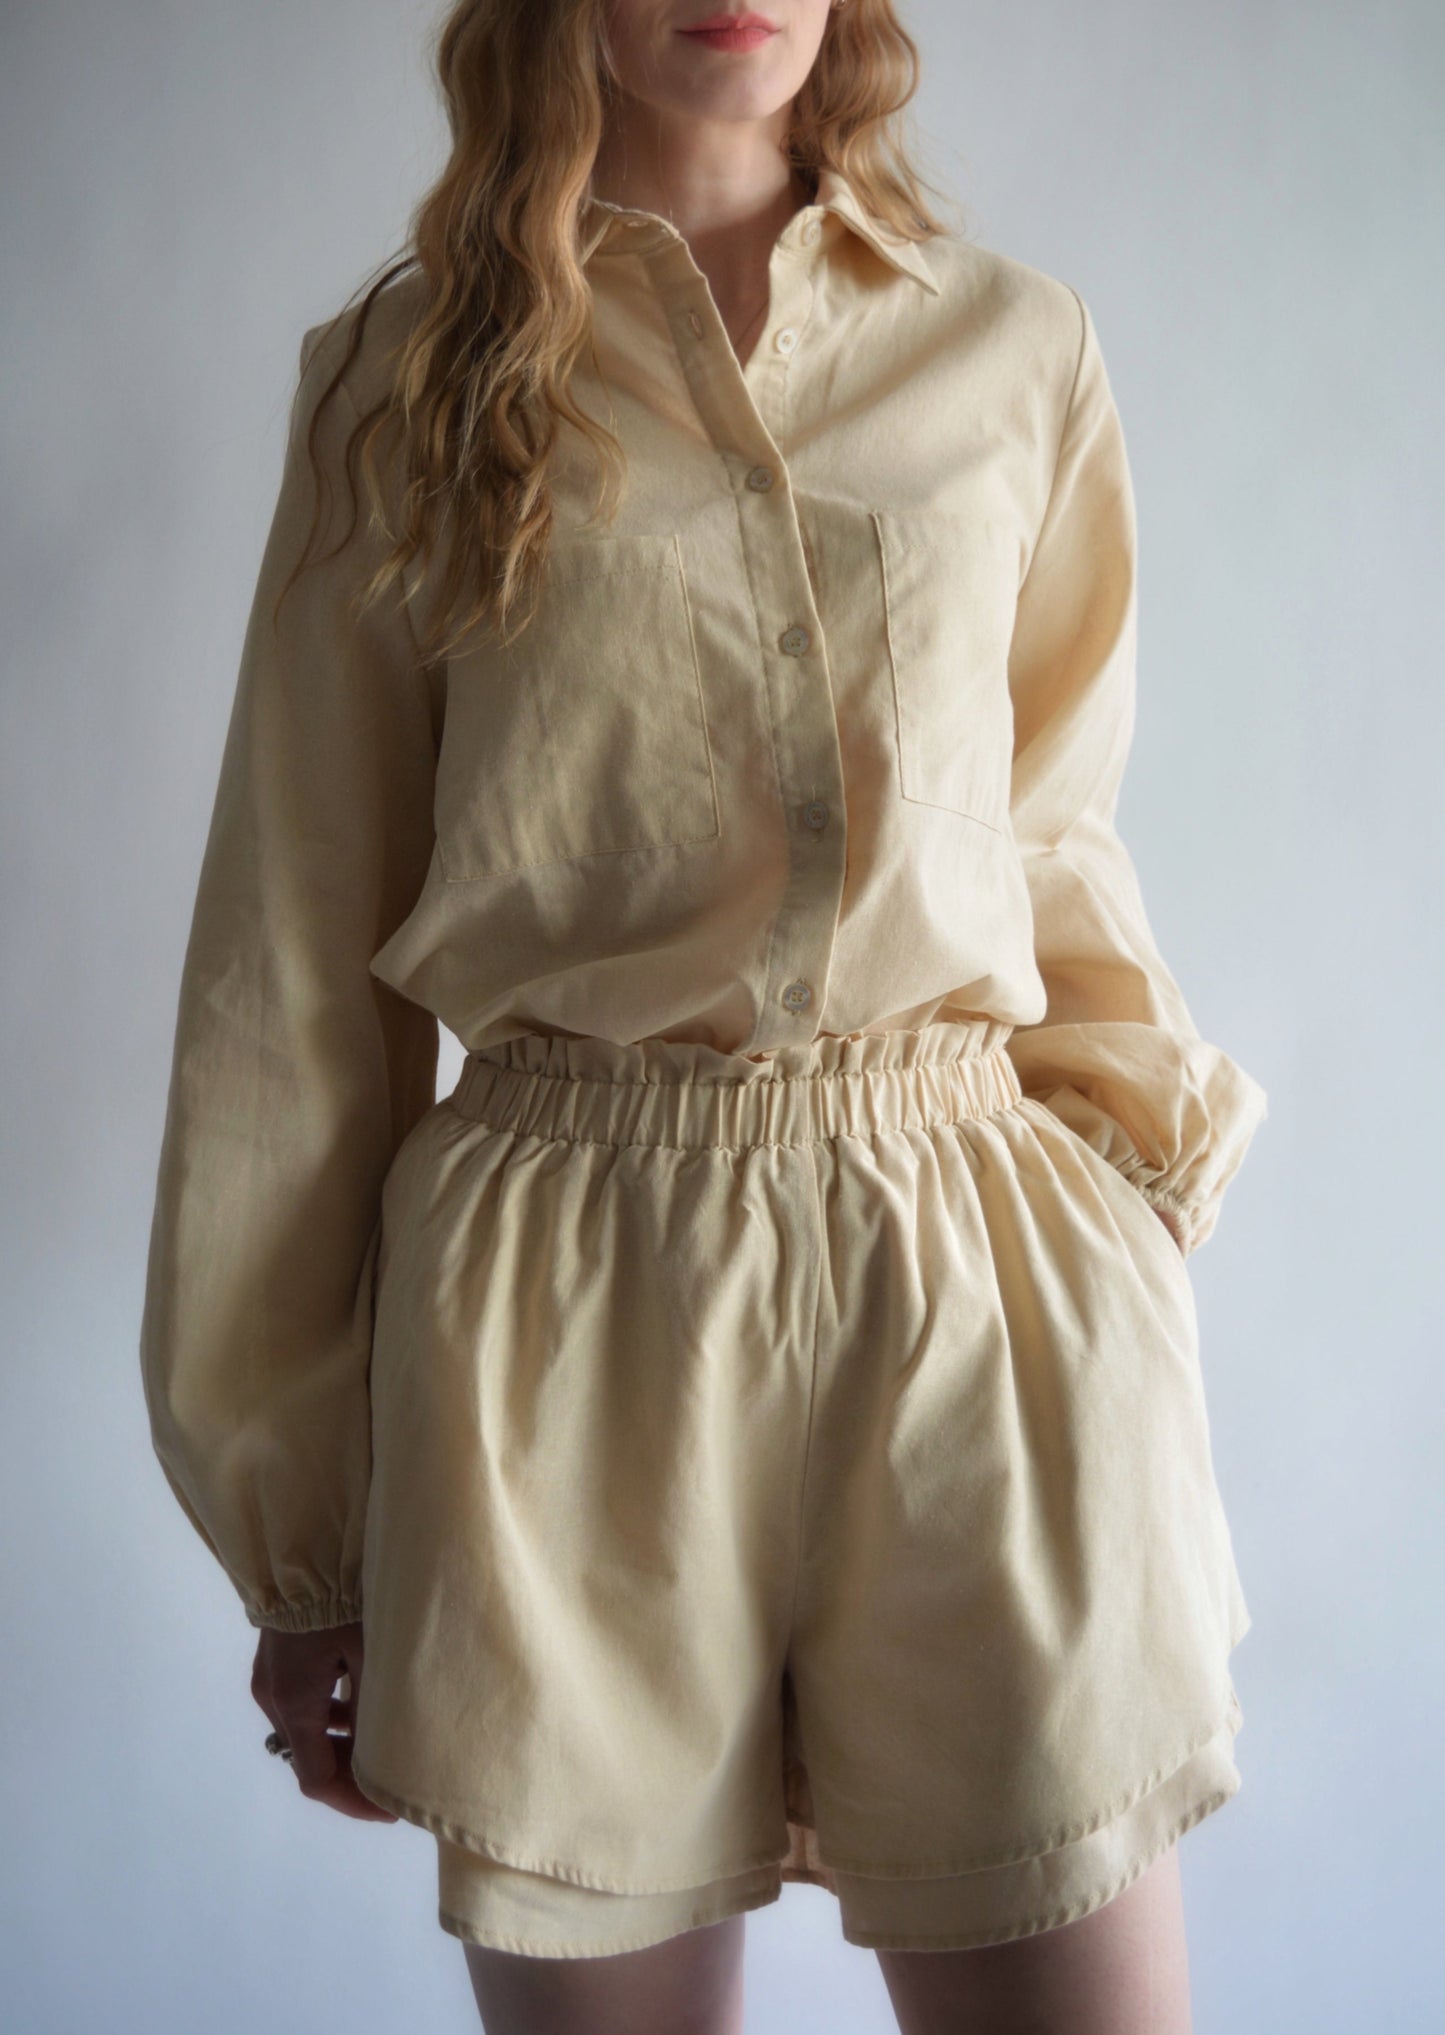 Two Piece Set - Cotton Blouse and Shorts in Beige color